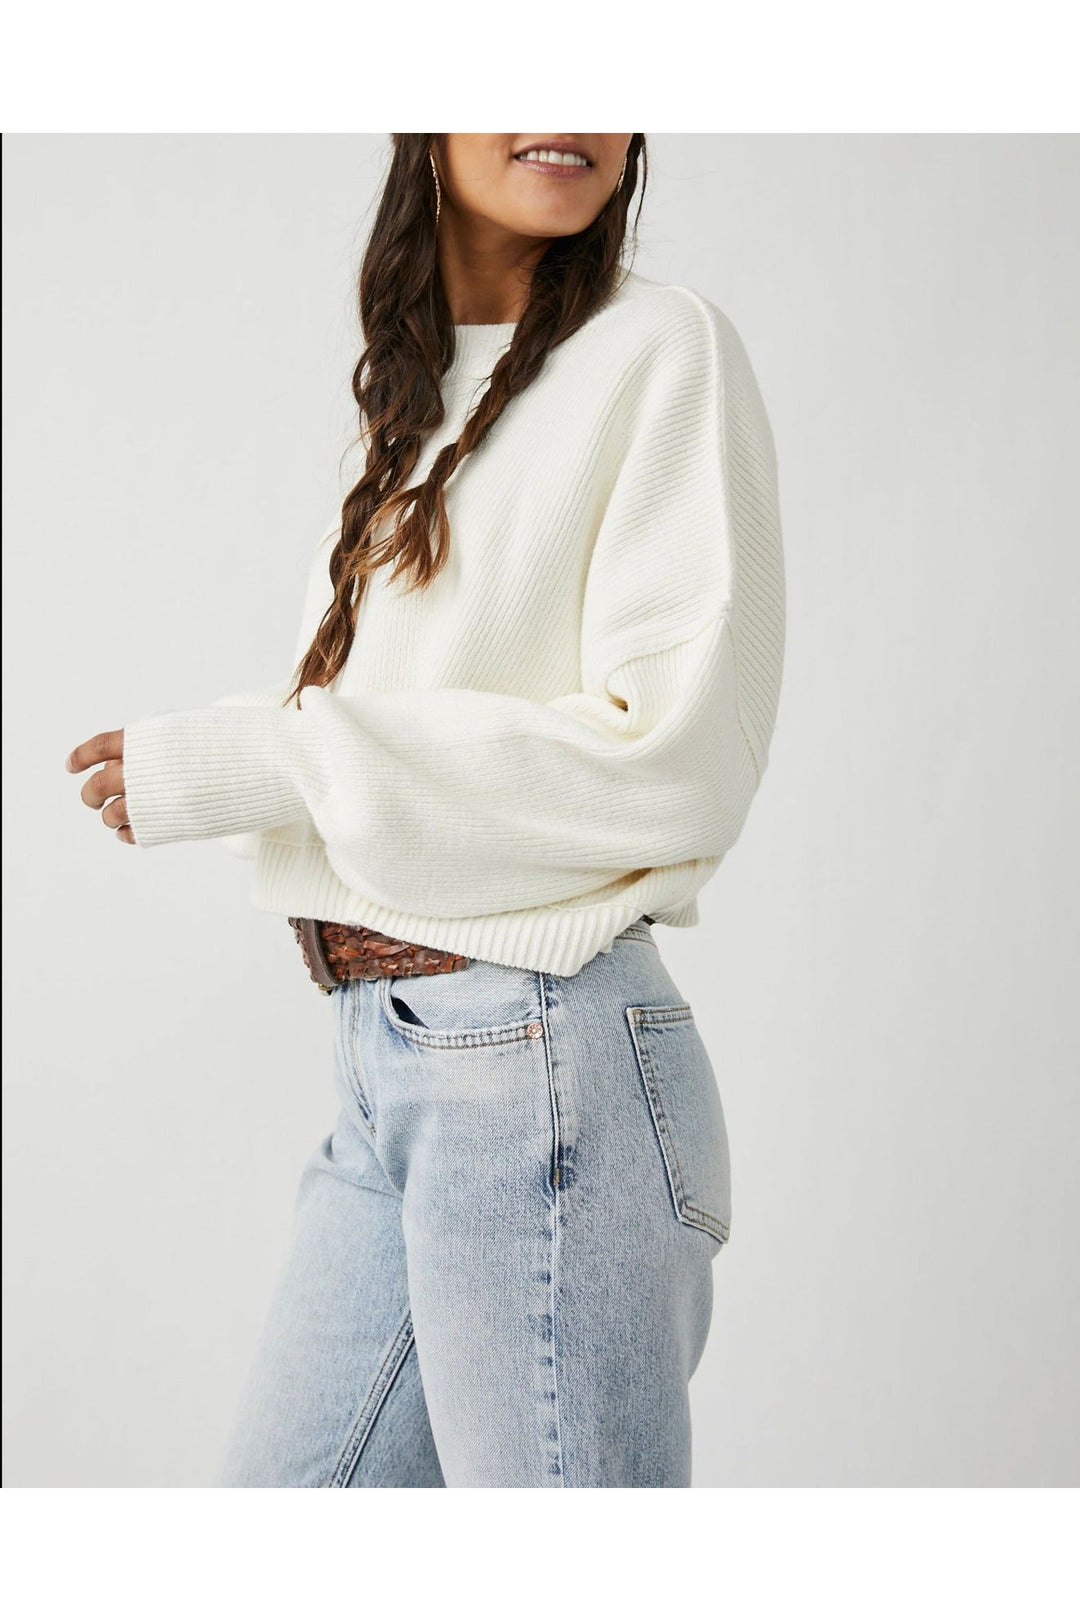 EASY STREET CROP PULLOVER SWEATER